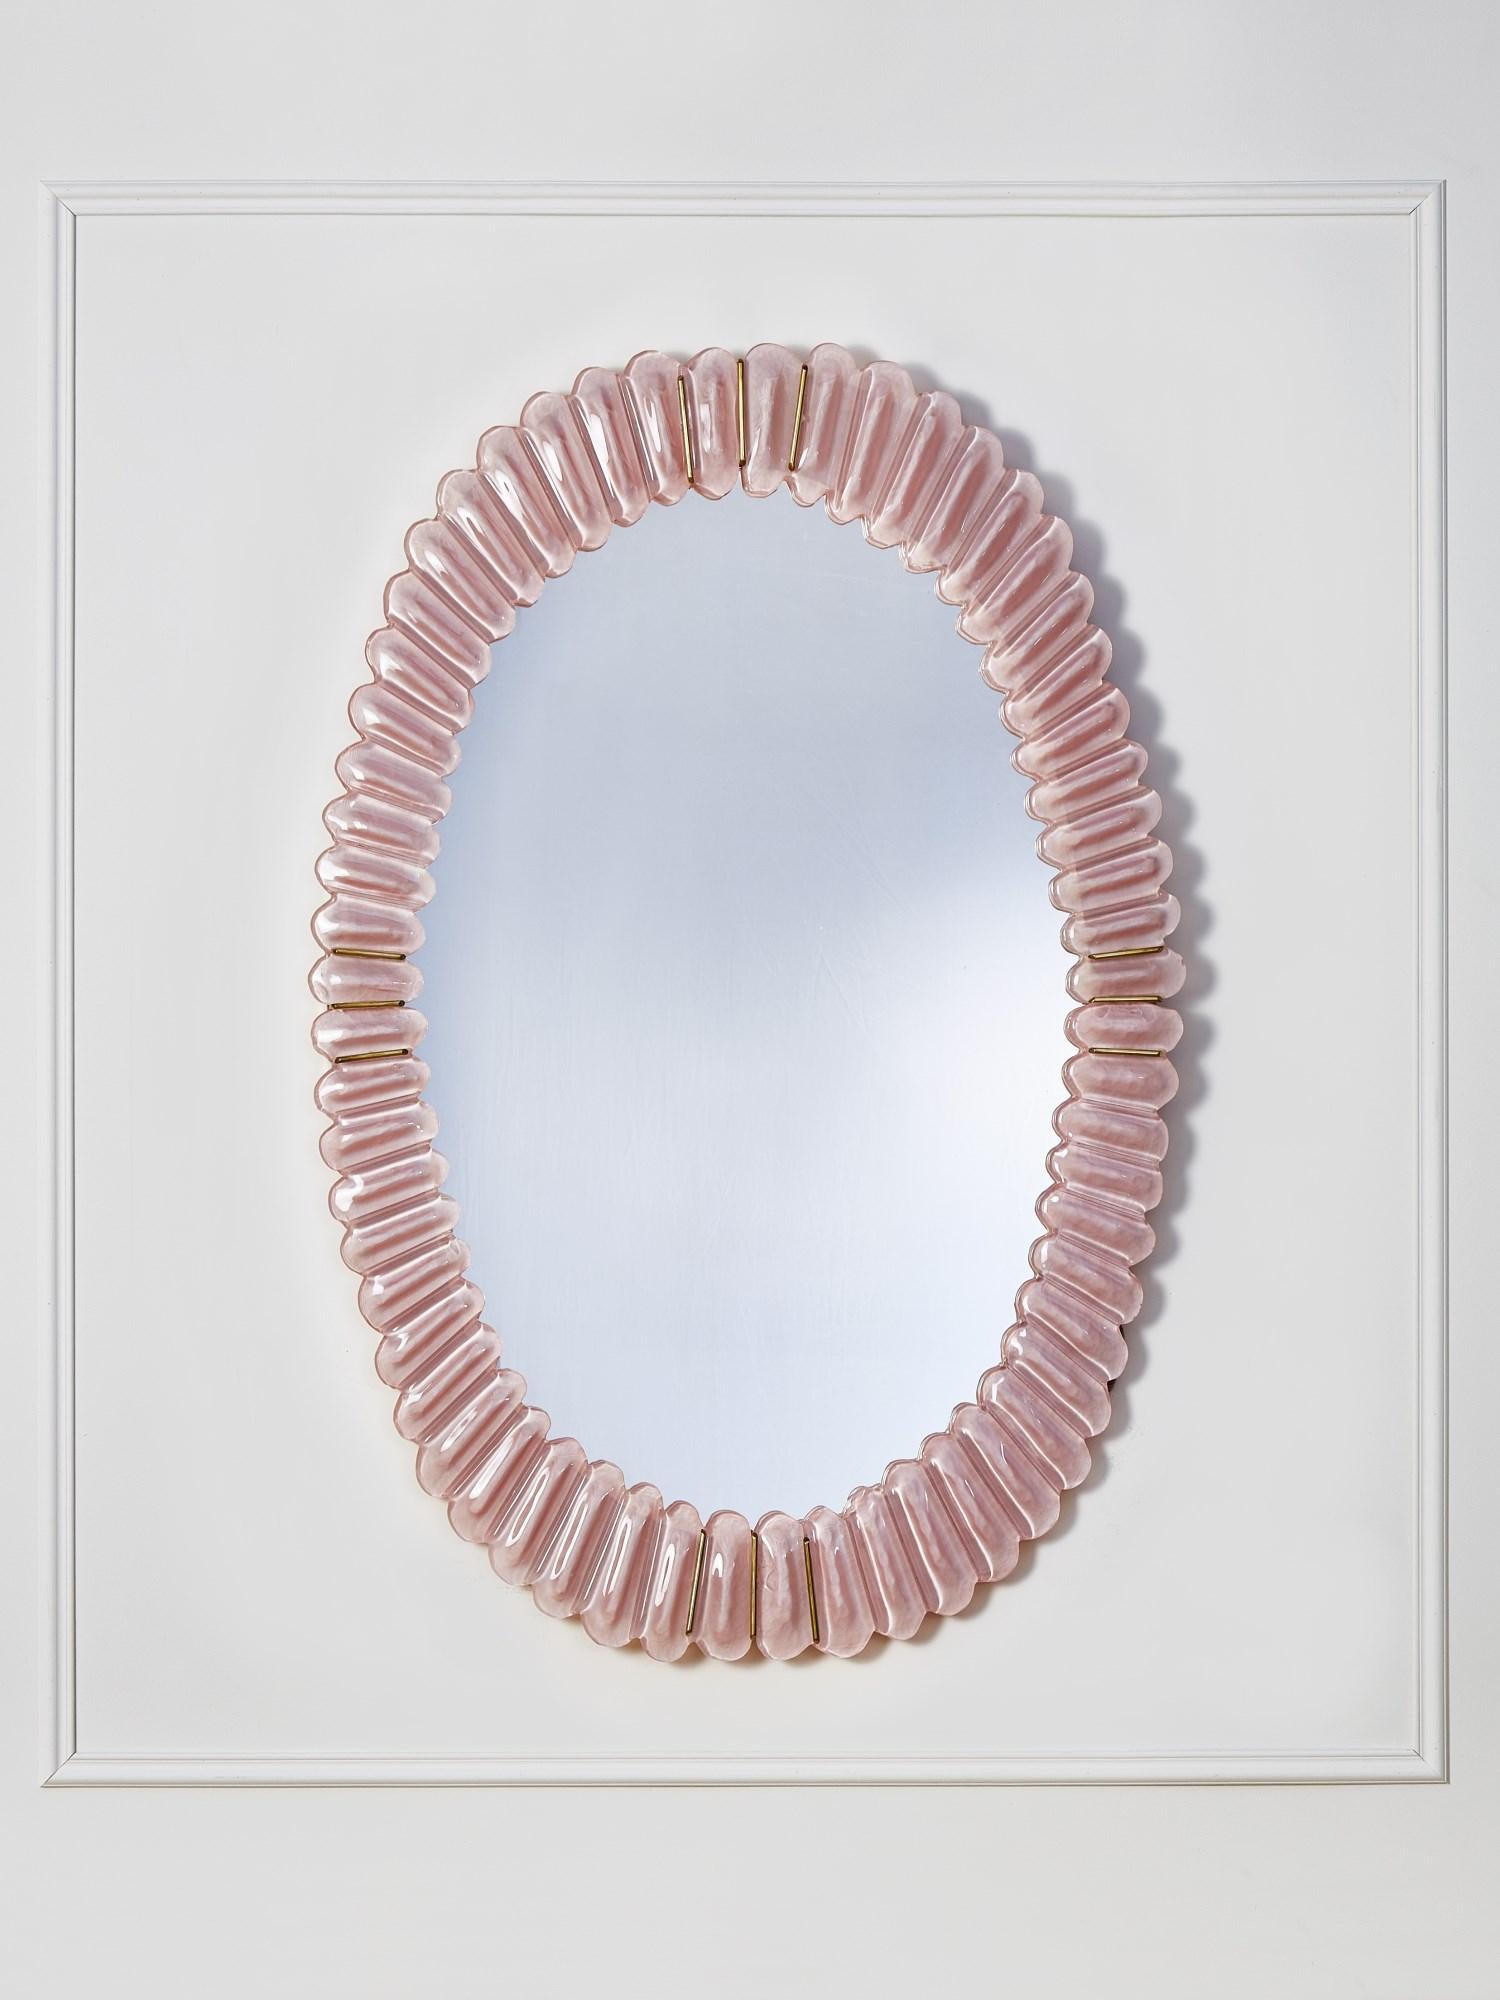 Oval mirror with frame in sculpted Murano glass and brass inlays.
Creation by Studio Glustin.